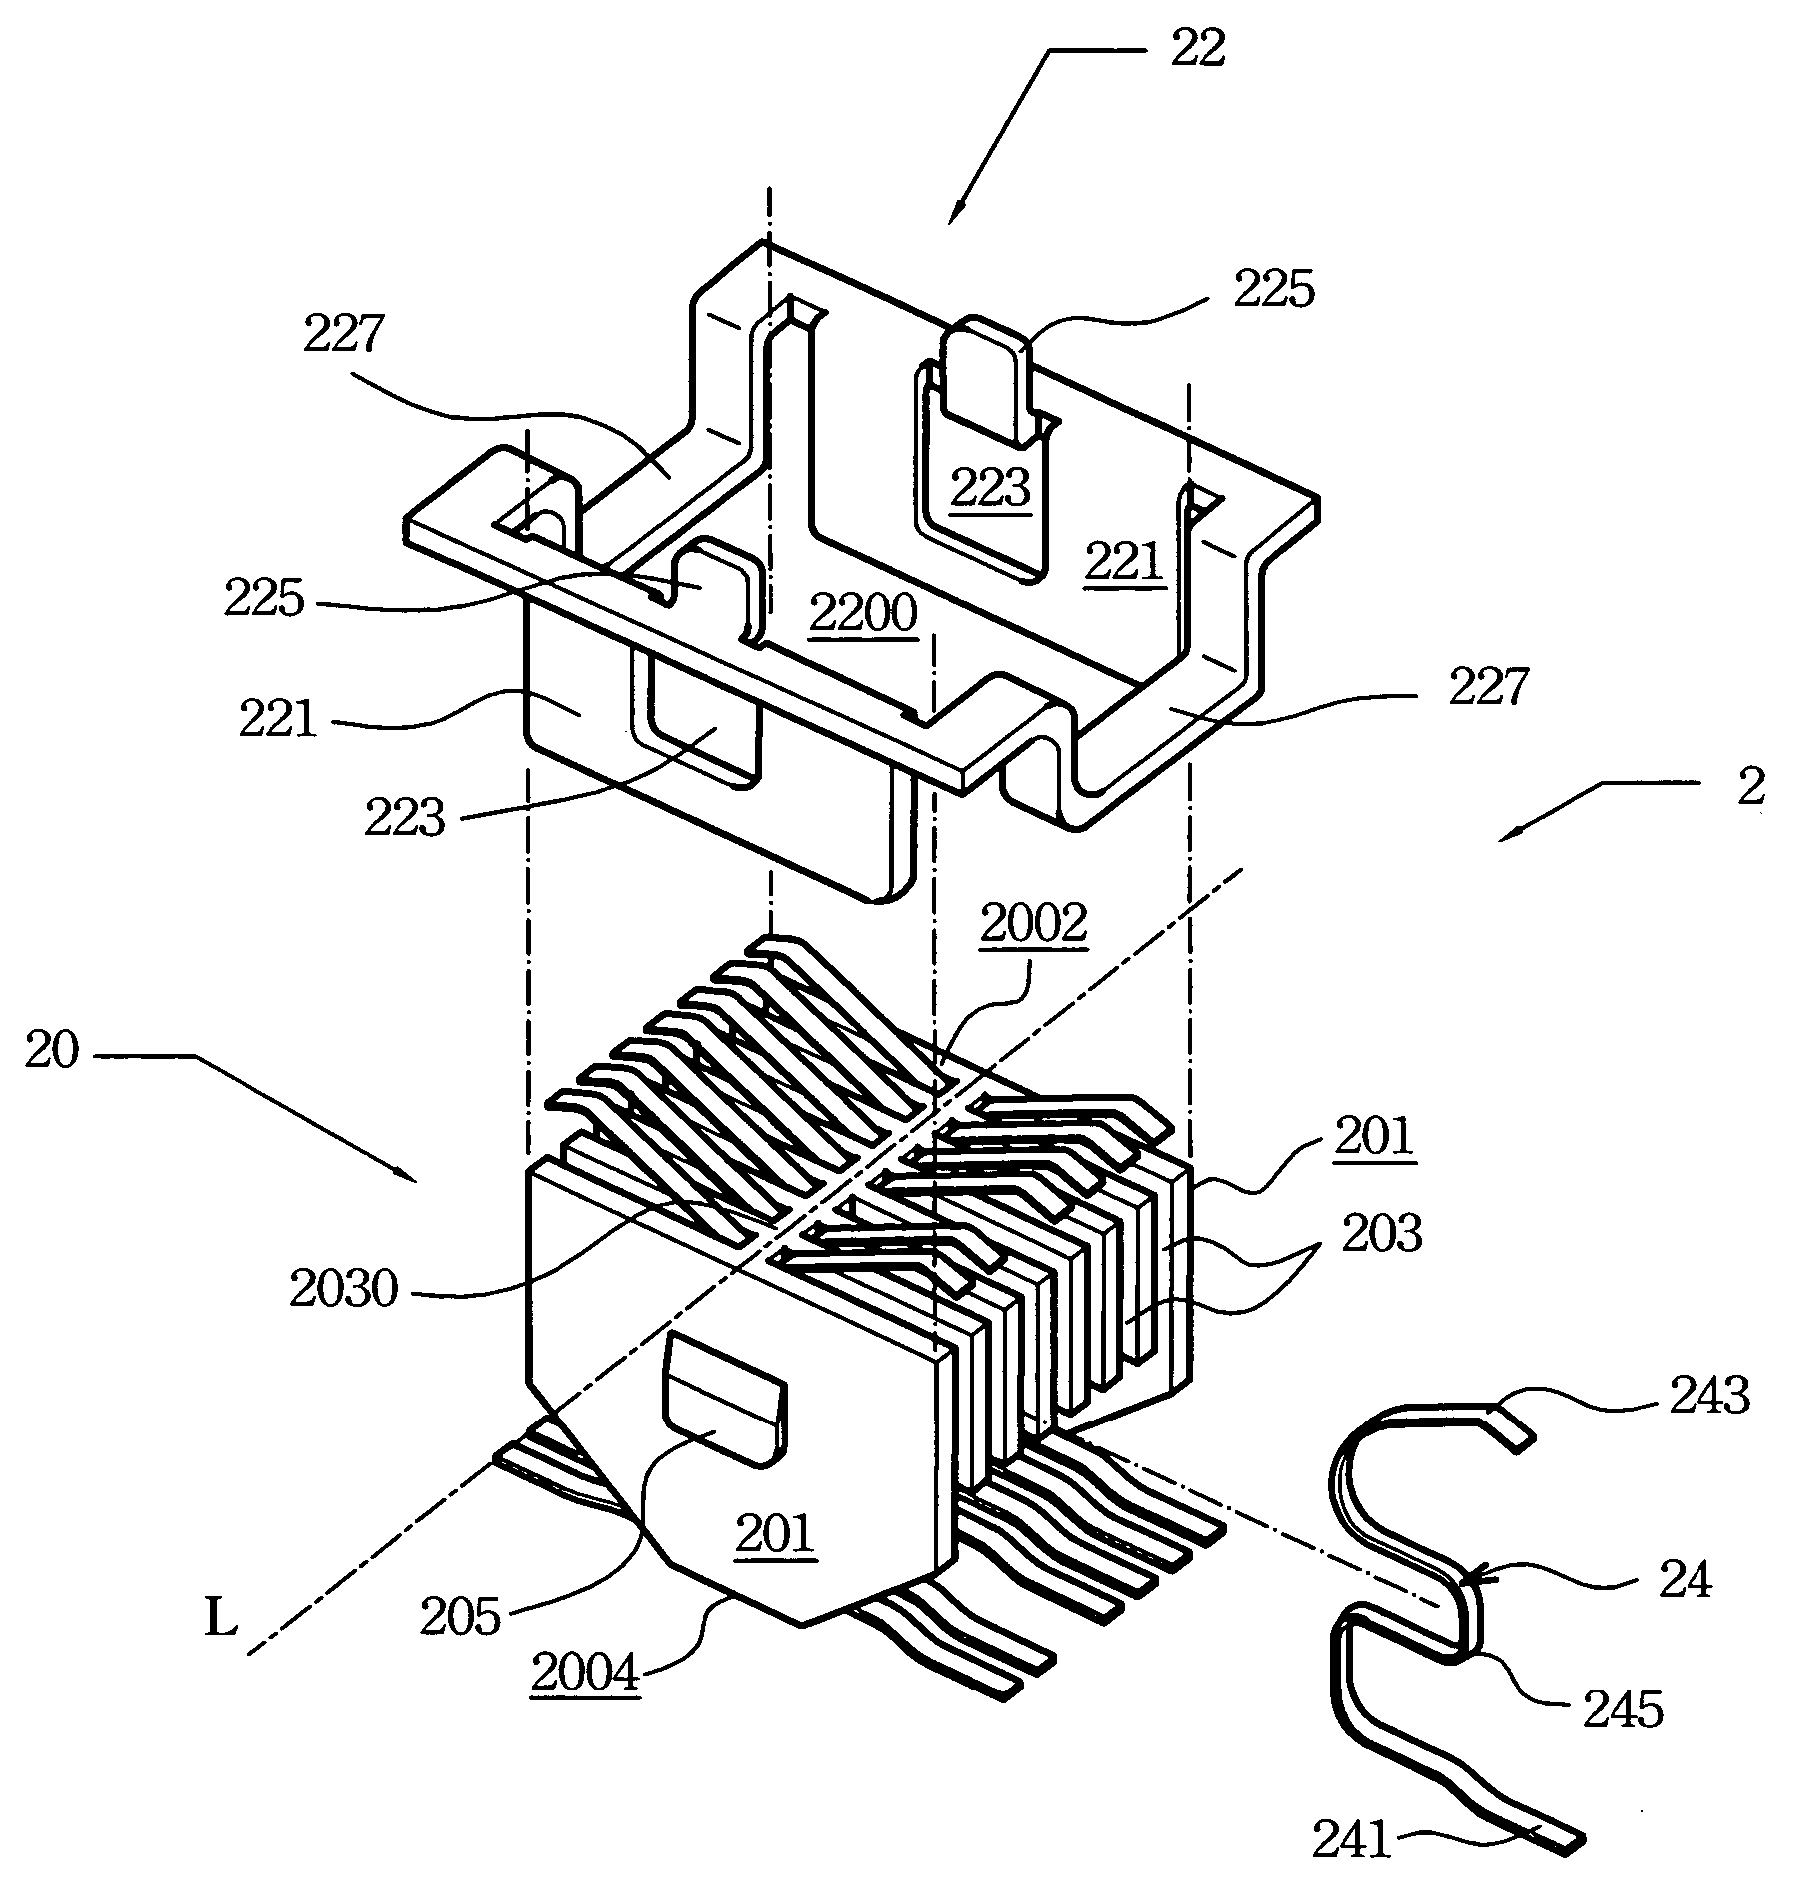 Board-to-board connector and assembly of printed circuit boards